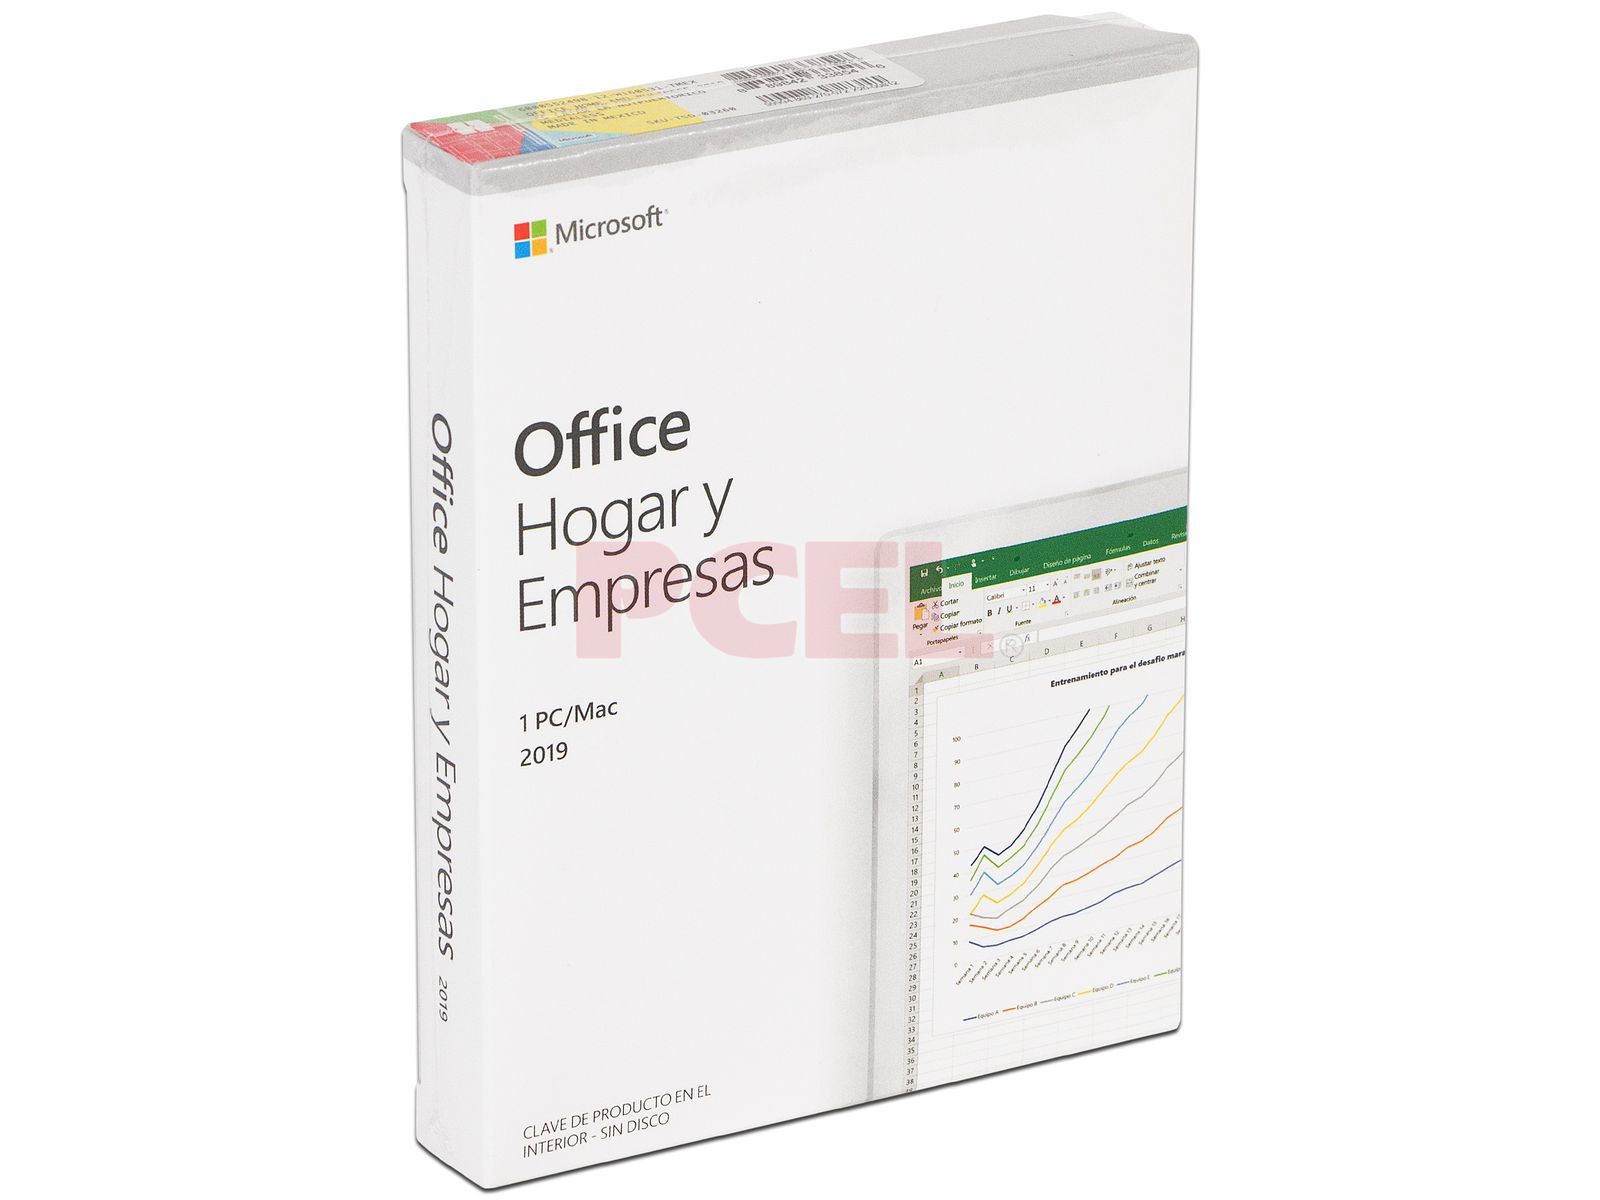 Requisitos Office 2019: ¿Cuáles son?